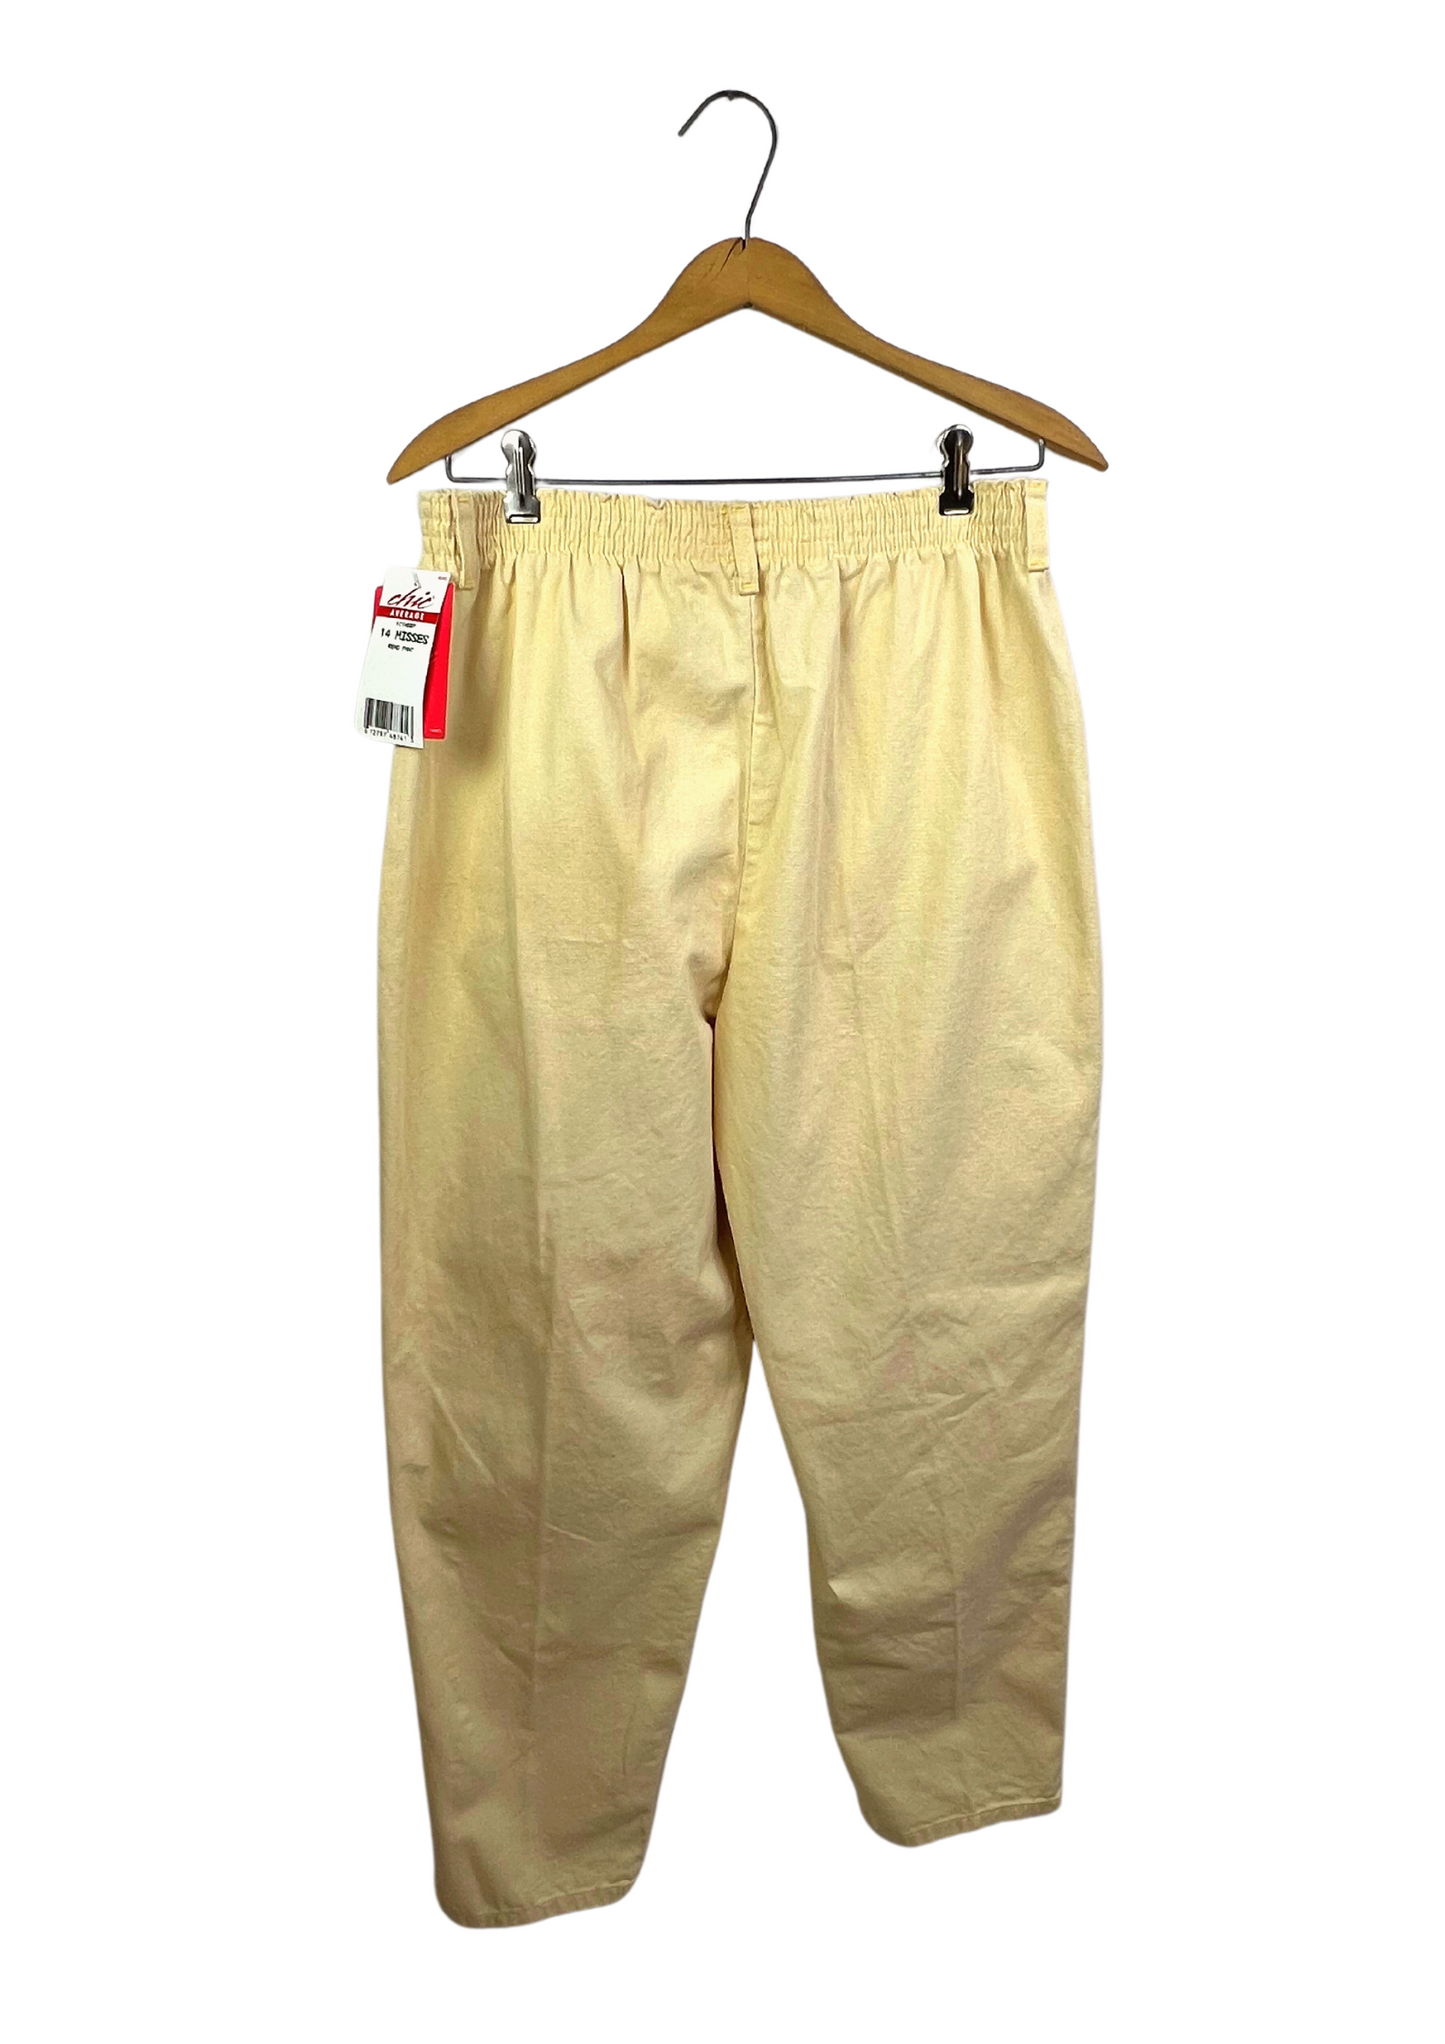 90’s Chic Jeans Pale Butter Yellow 100% Cotton Tapered Leg Baggy Jogger Pants